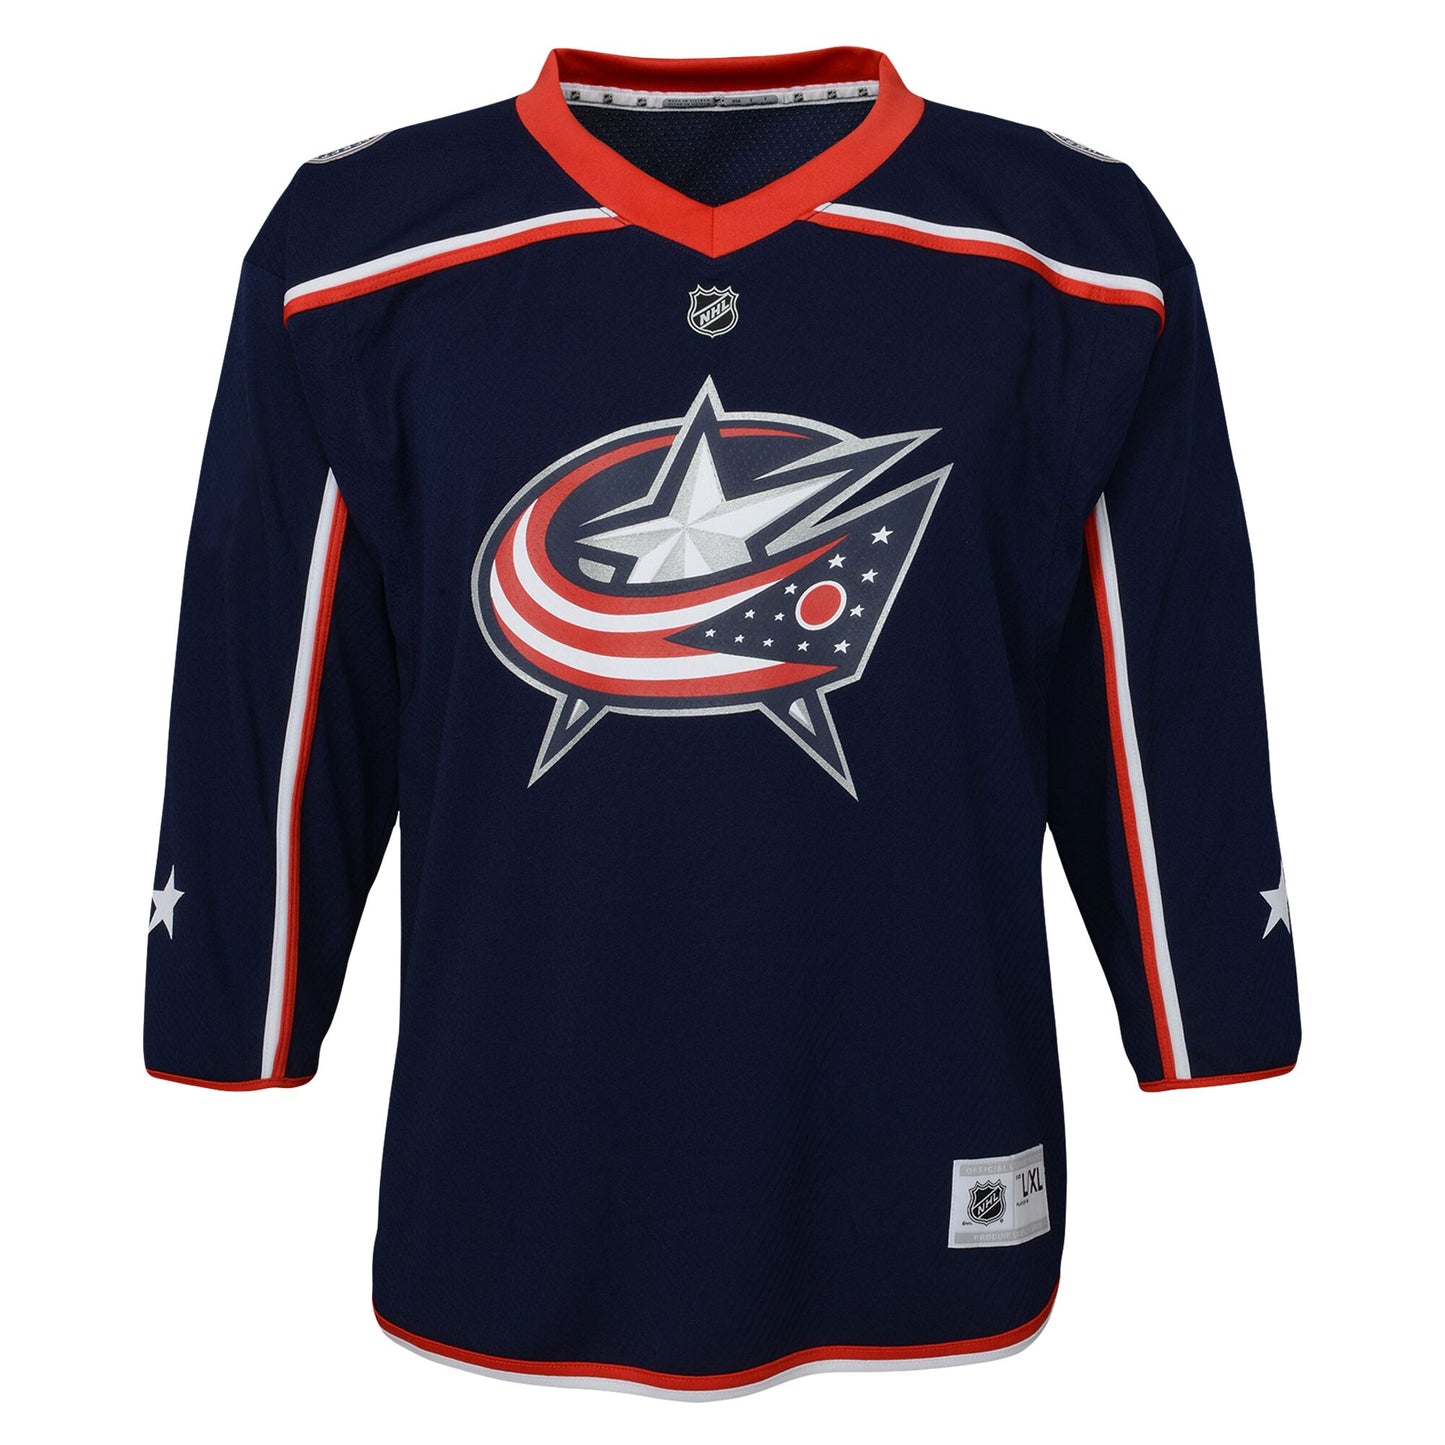 Johnny Gaudreau Columbus Blue Jackets Toddler Home Replica Player Jersey - Navy